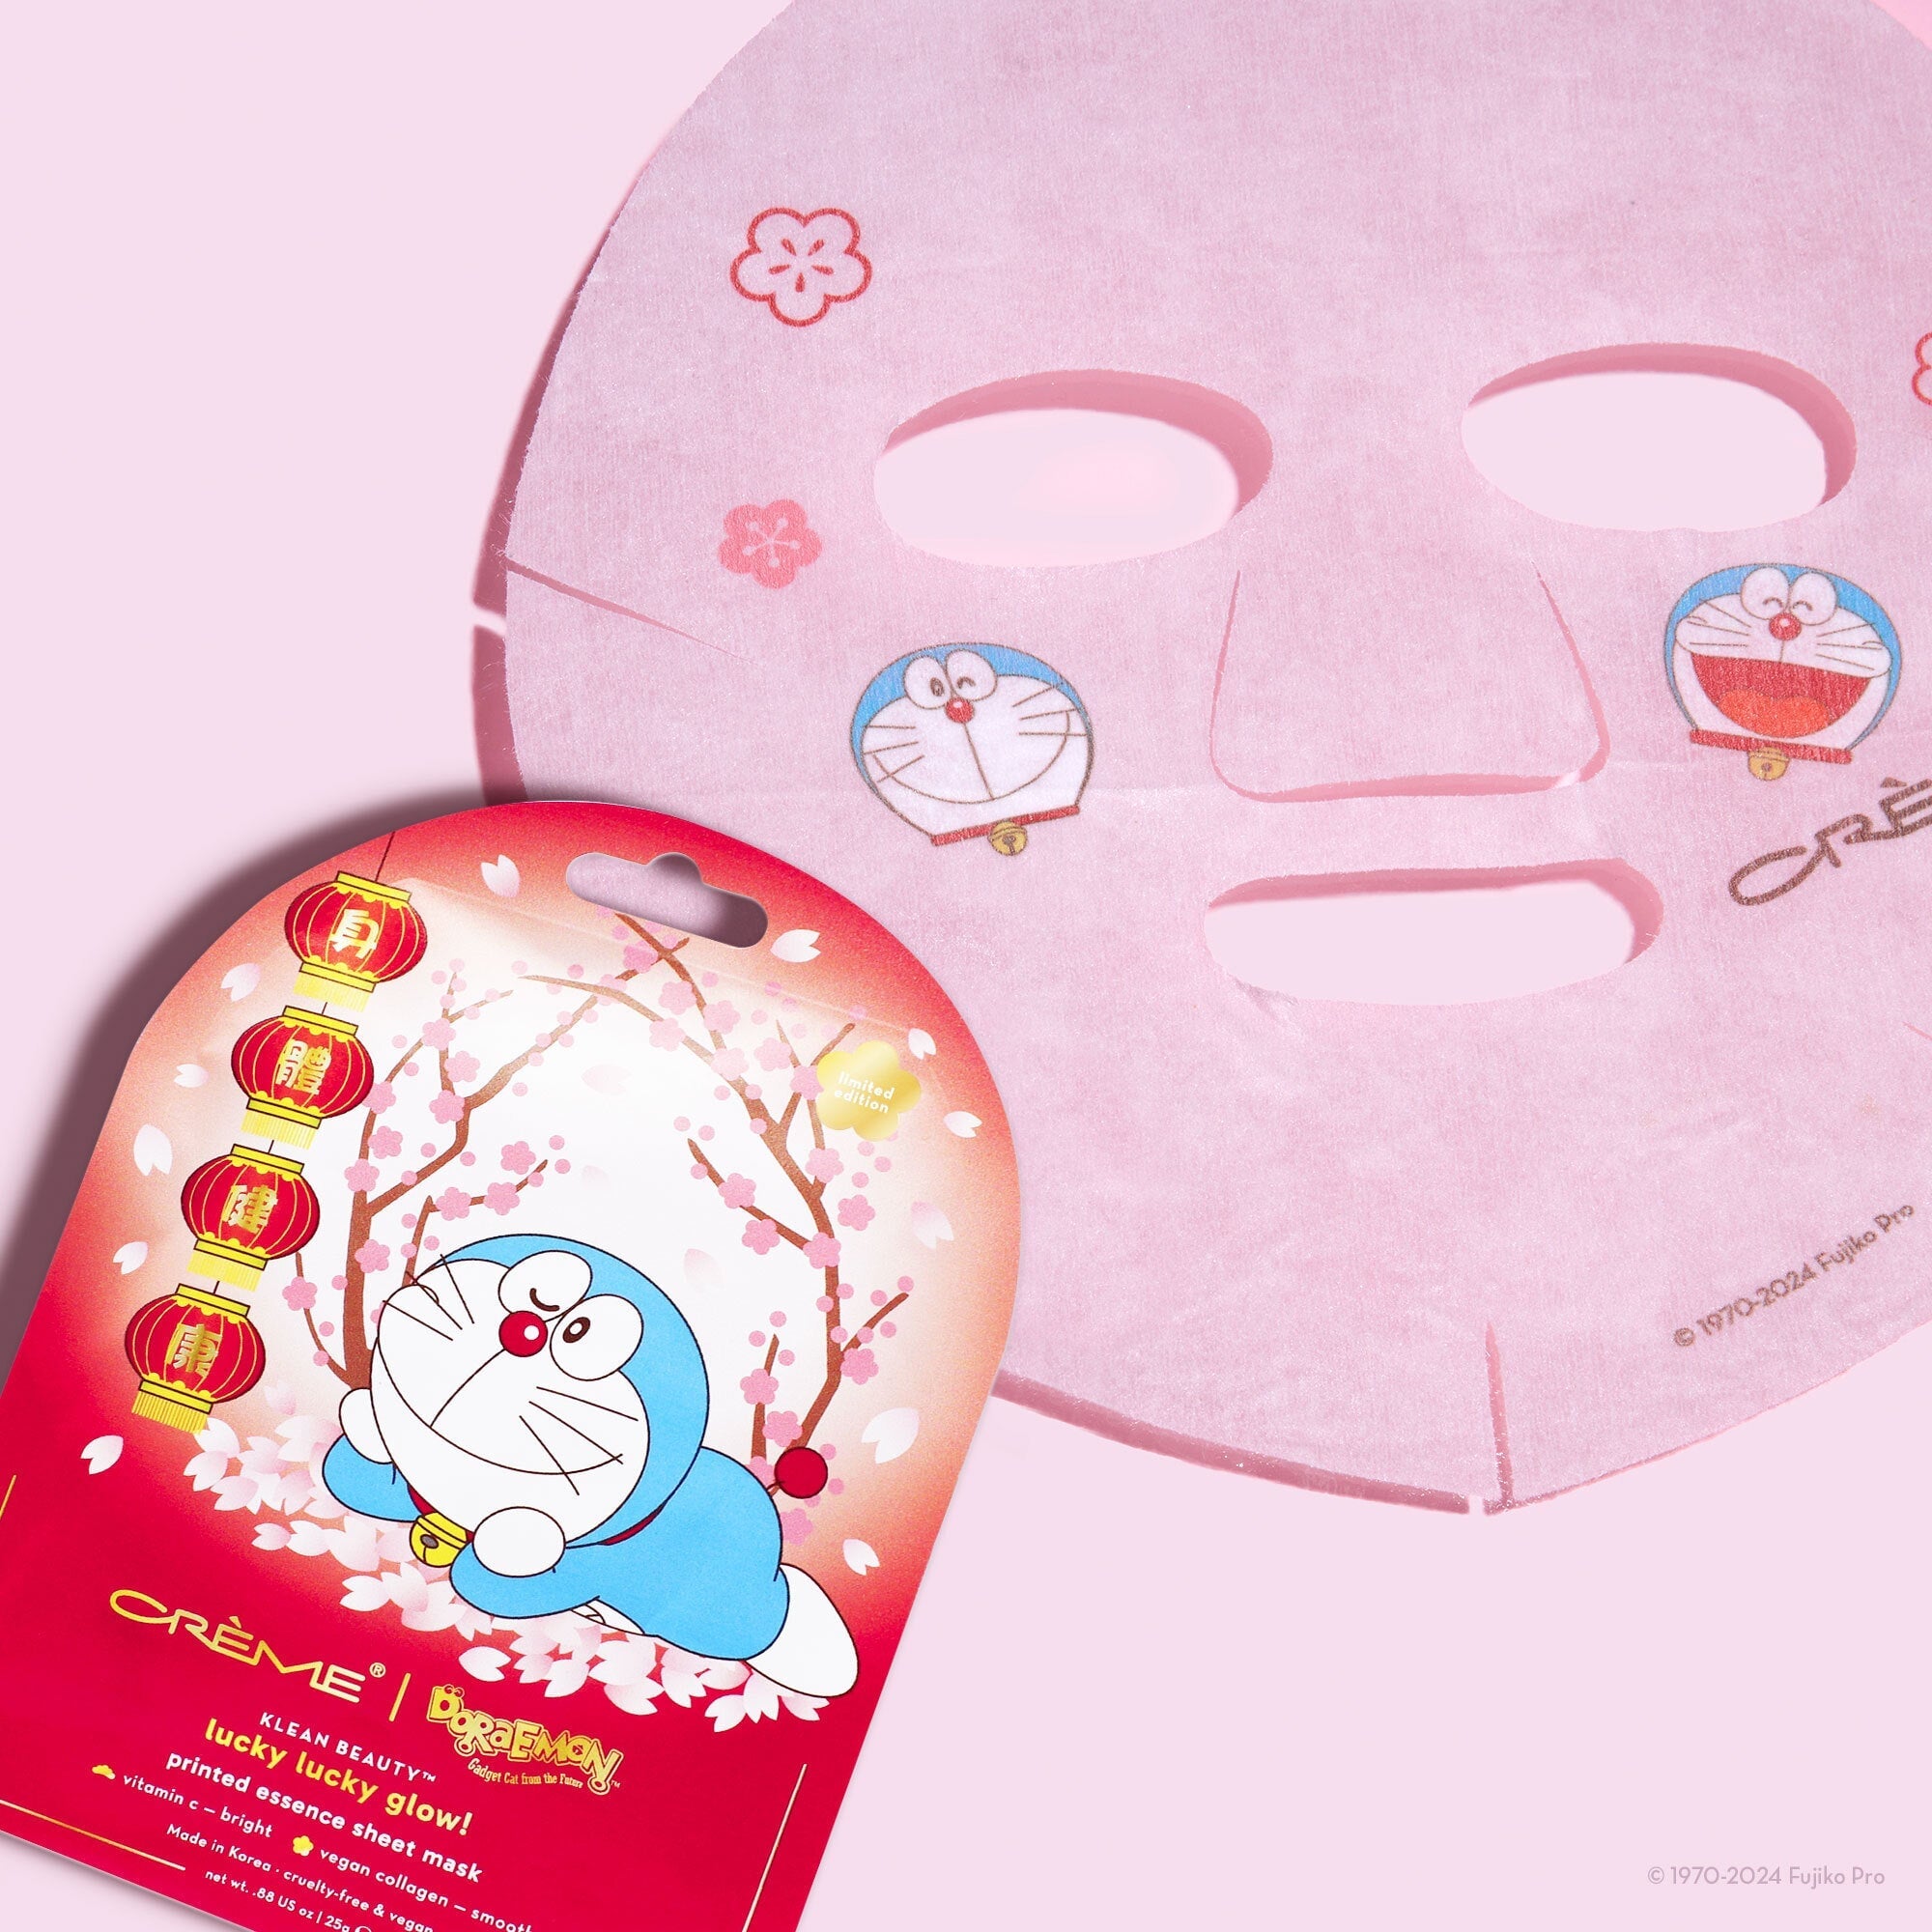 The Crème Shop | Doraemon Lucky Lucky Glow! Printed Essence Sheet Mask (Set of 3) Animated Sheet Masks The Crème Shop x Doraemon 